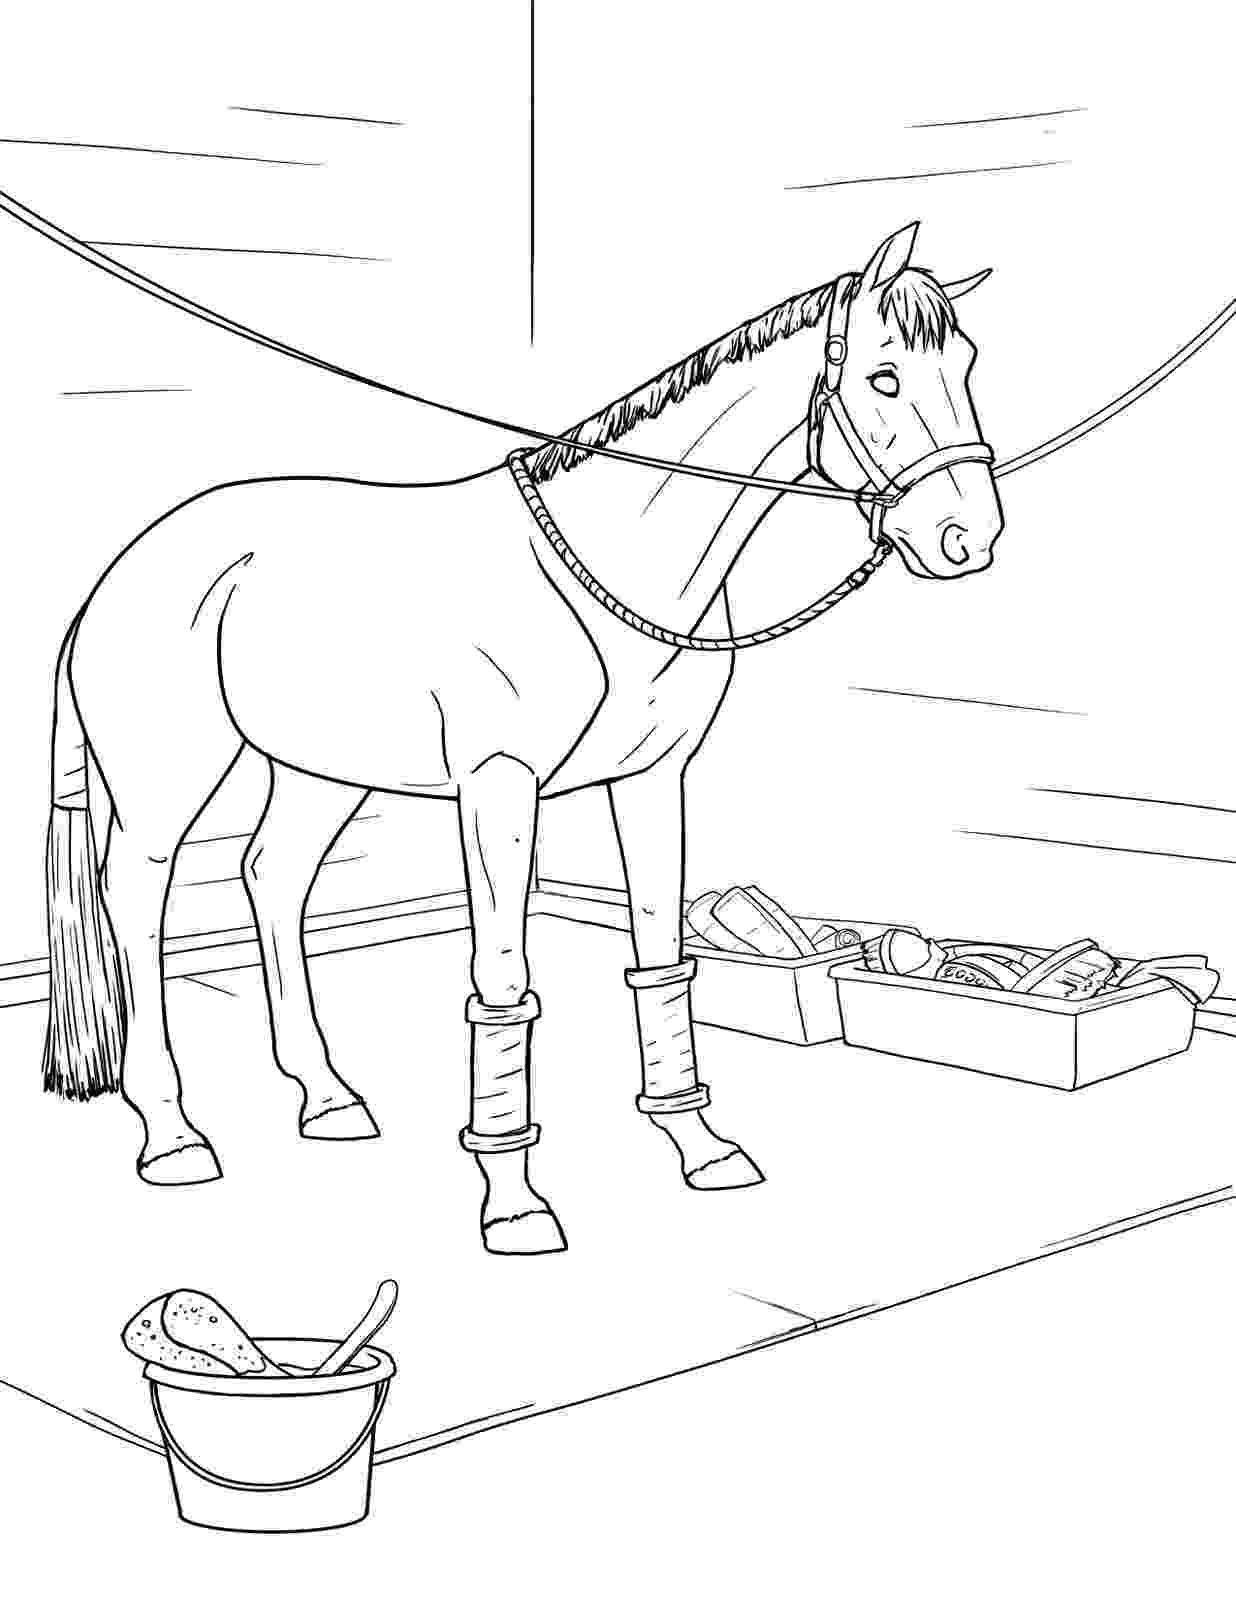 coloring pages of horses and ponies coloring pages horse coloring pages free and printable pages ponies of and horses coloring 